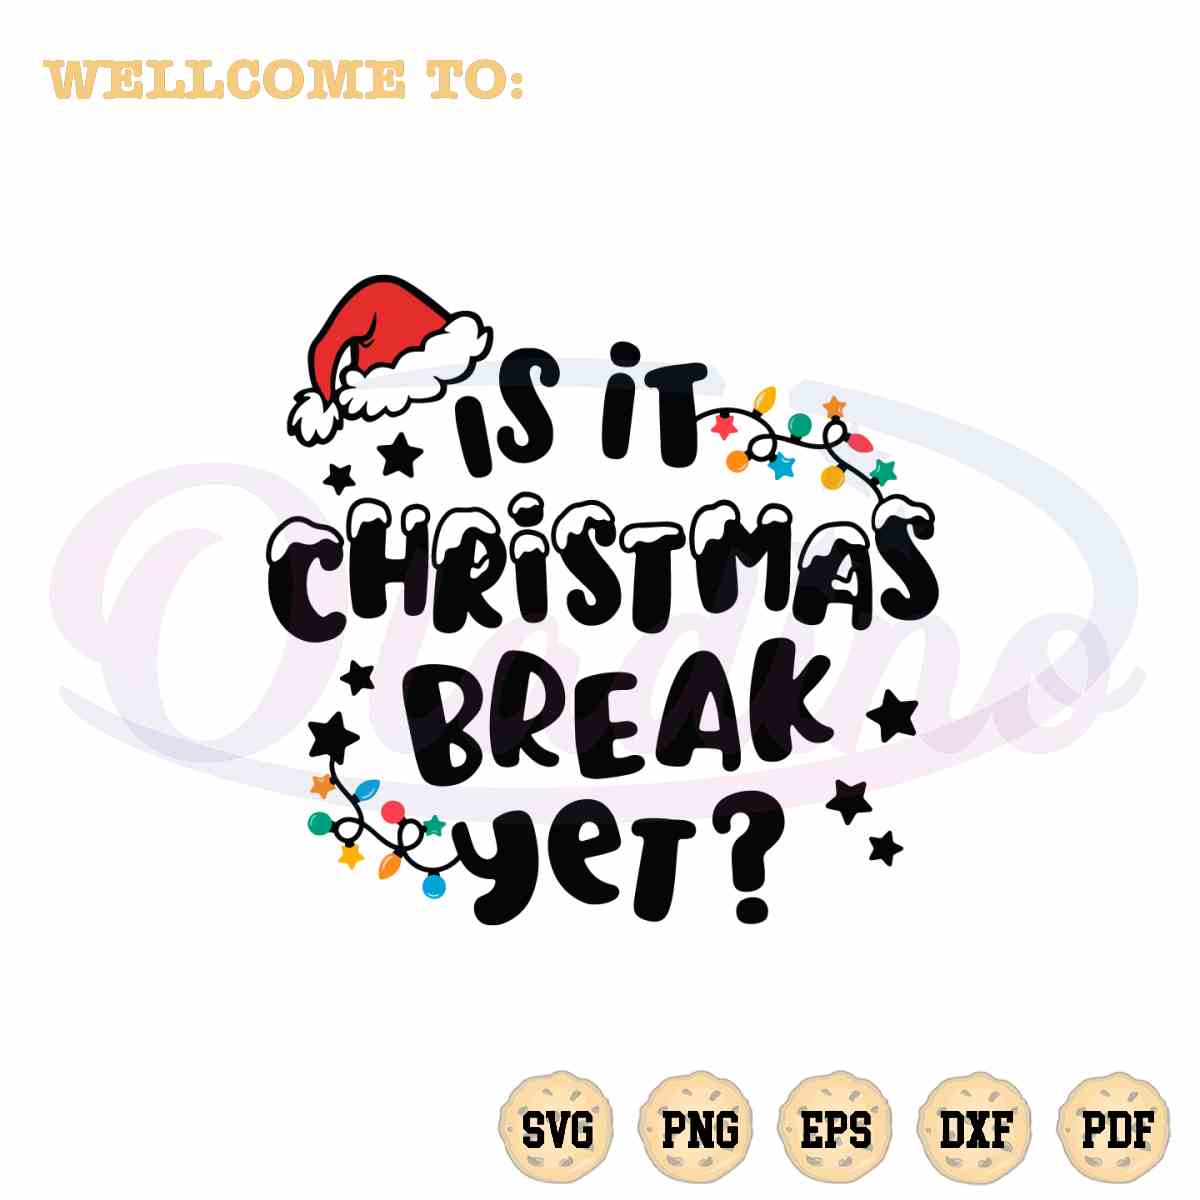 is-it-christmas-break-yet-svg-christmas-quote-cutting-digital-file